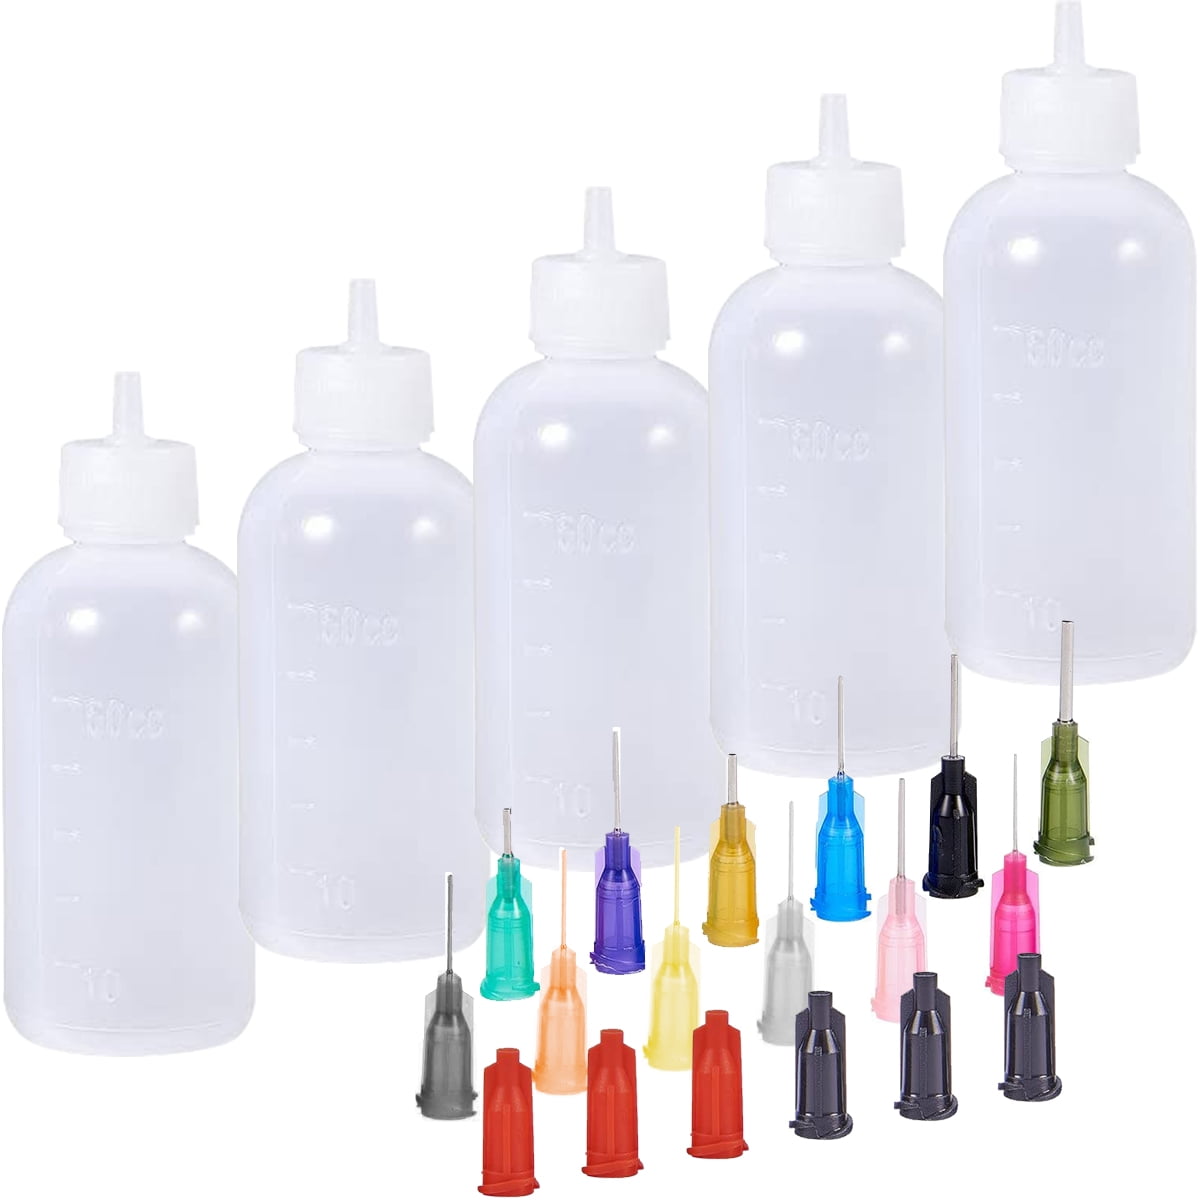 8 PACK Multi Purpose DIY Precision Tip Applicator Bottles Set Ultra Fine  Needle Tip Glue Applicator Squeeze Bottles for DIY Quilling Acrylic Paint  on OnBuy